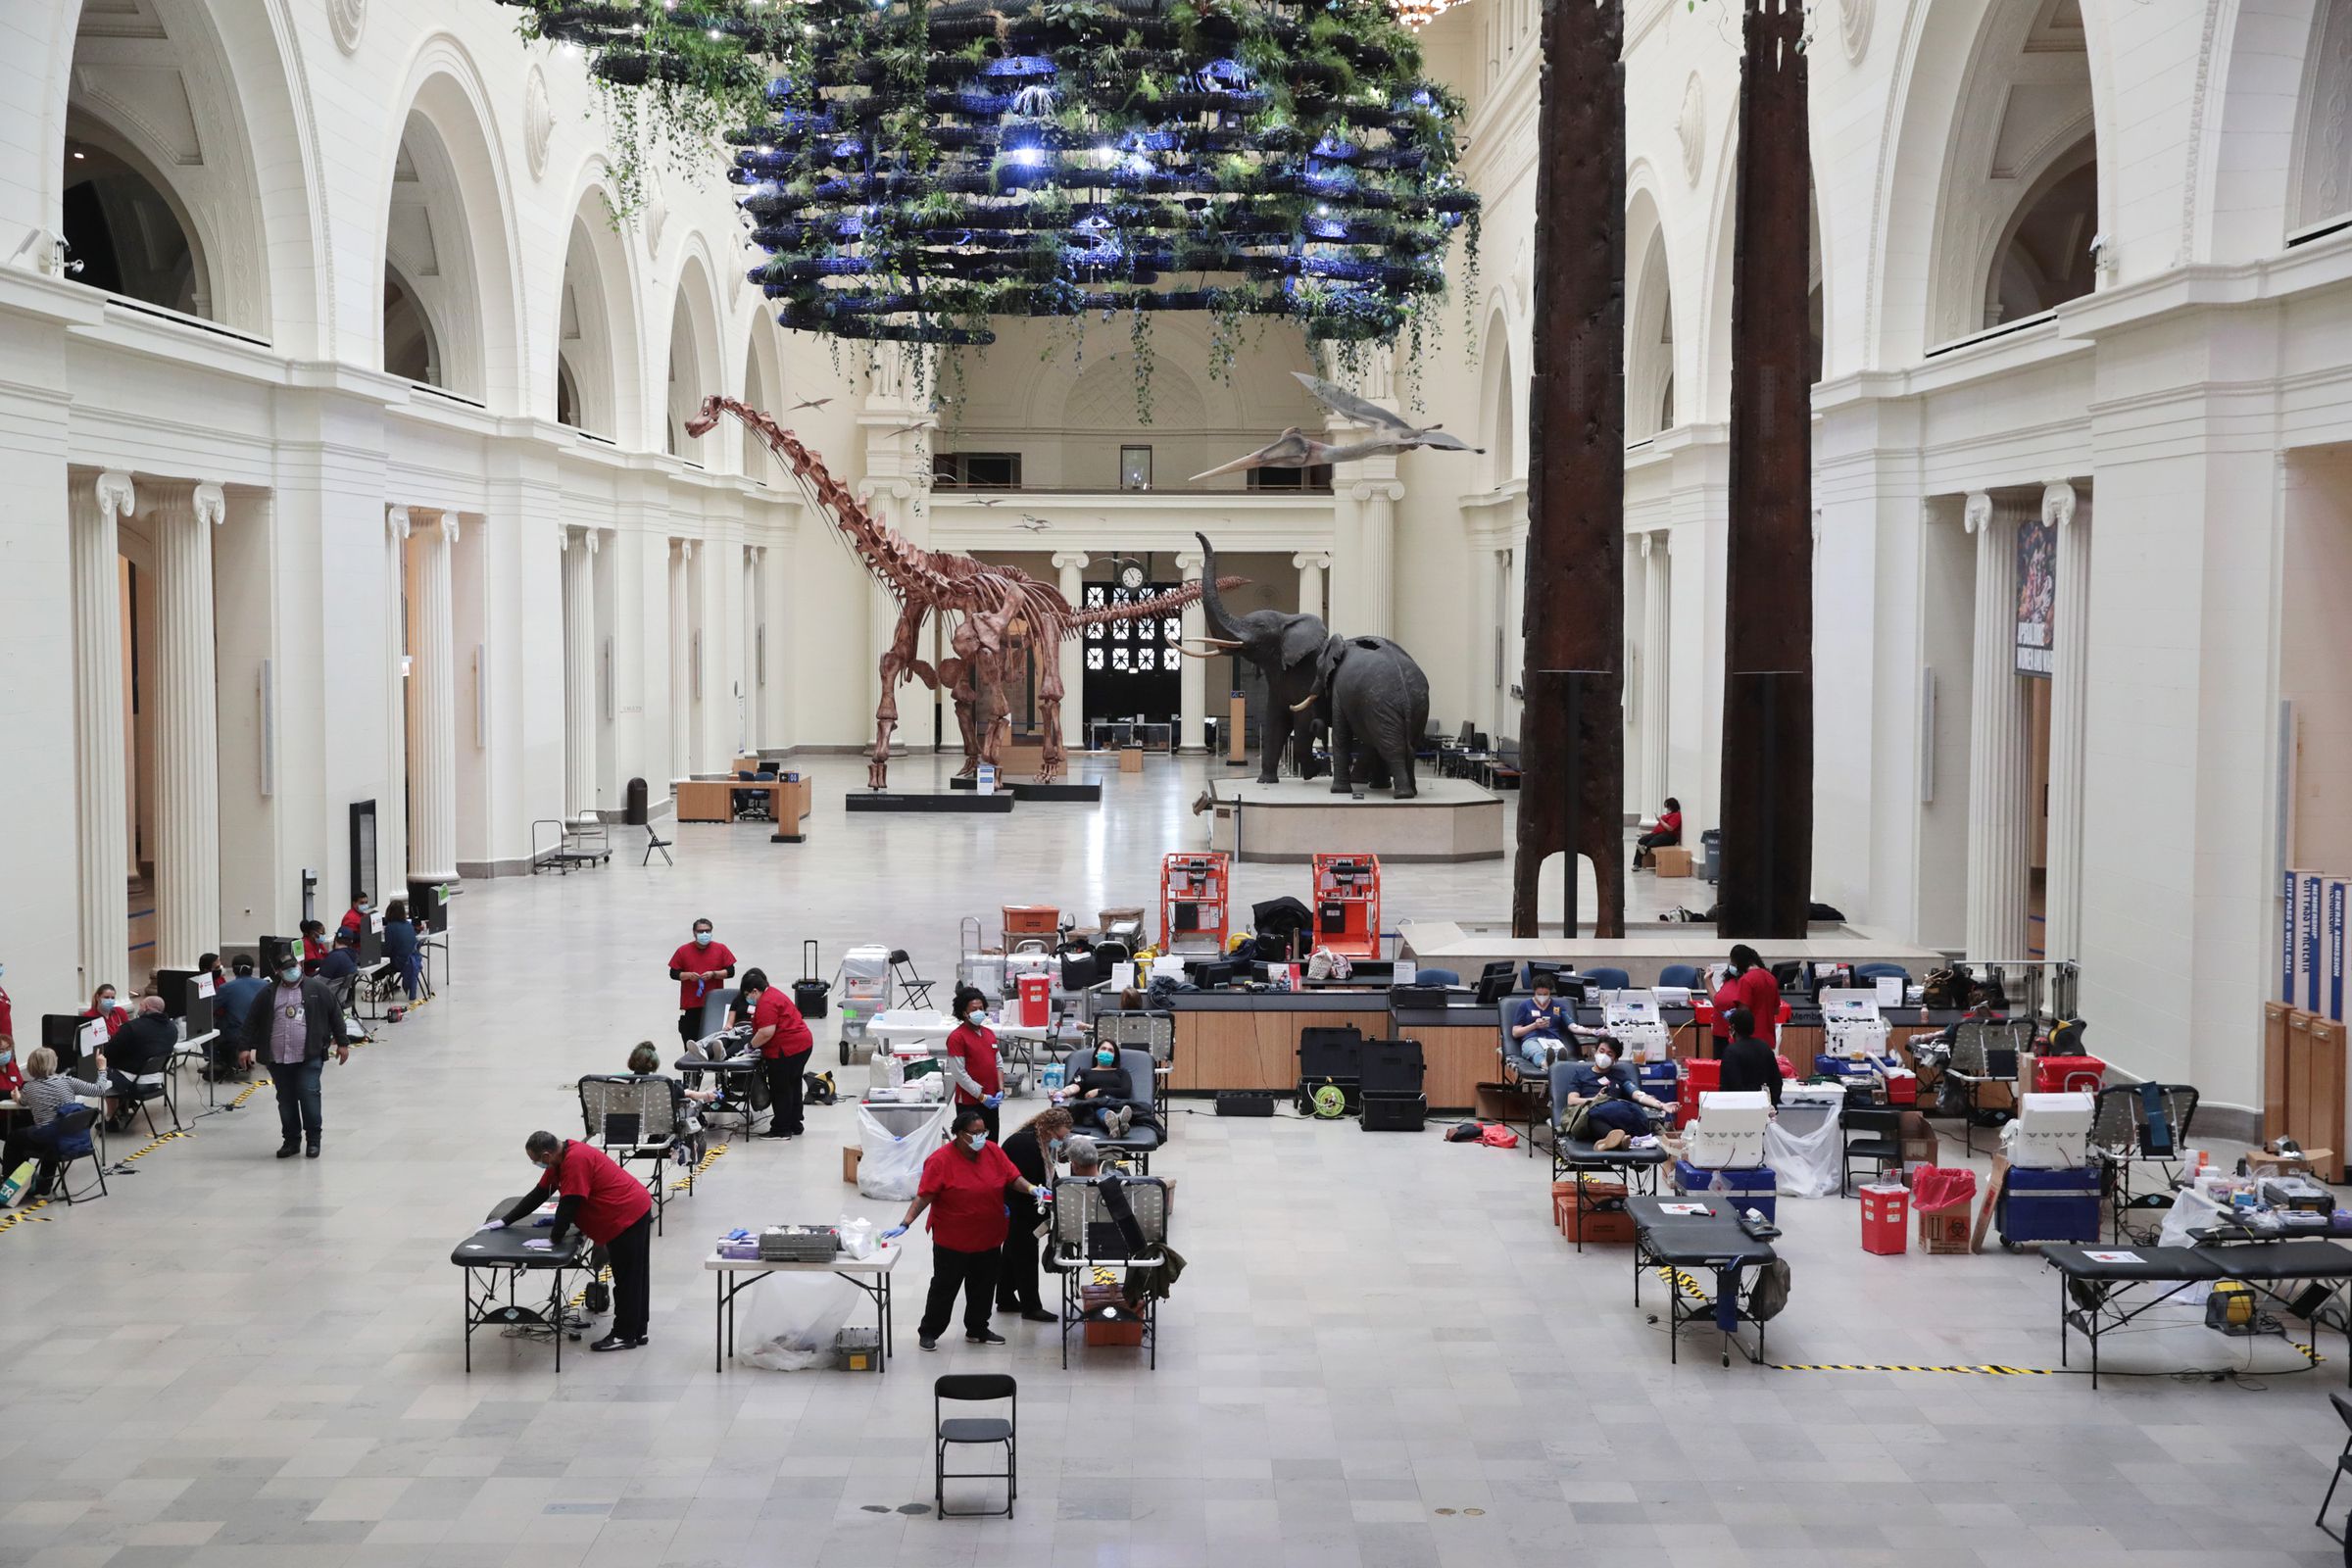 Chicago’s Field Museum Of Natural History Hosts Blood Drive Amid COVID-19 Crisis